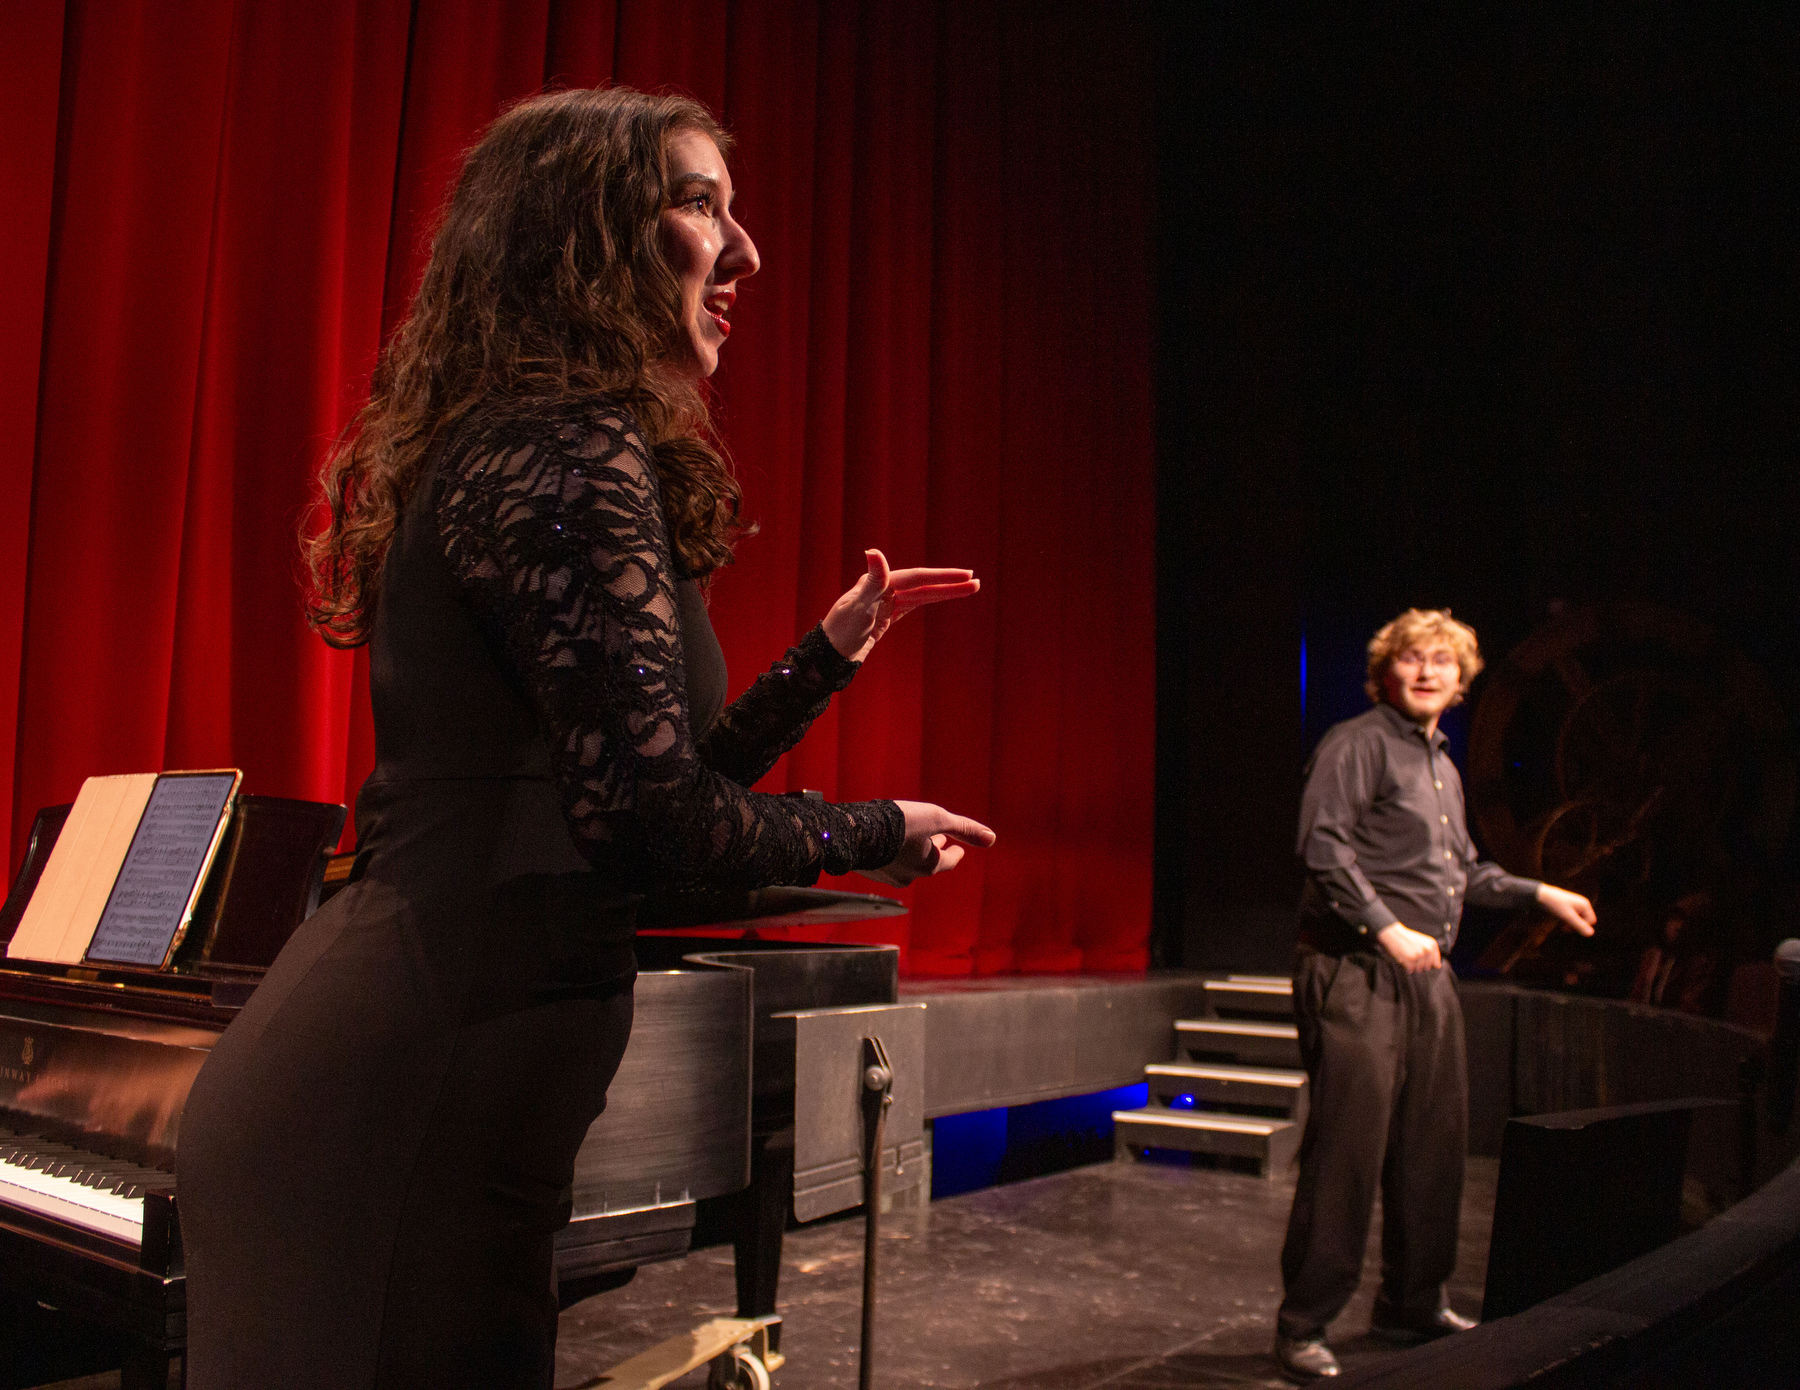 The Music Department's Collage Concert featured many of the department’s talented students including soprano Lizzy Dunn and baritone Griffin Marriner singing “Pa Pa Pa Papageno” (from “Die Zauberflöte”) by Wolfgang Amadeus Mozart. 